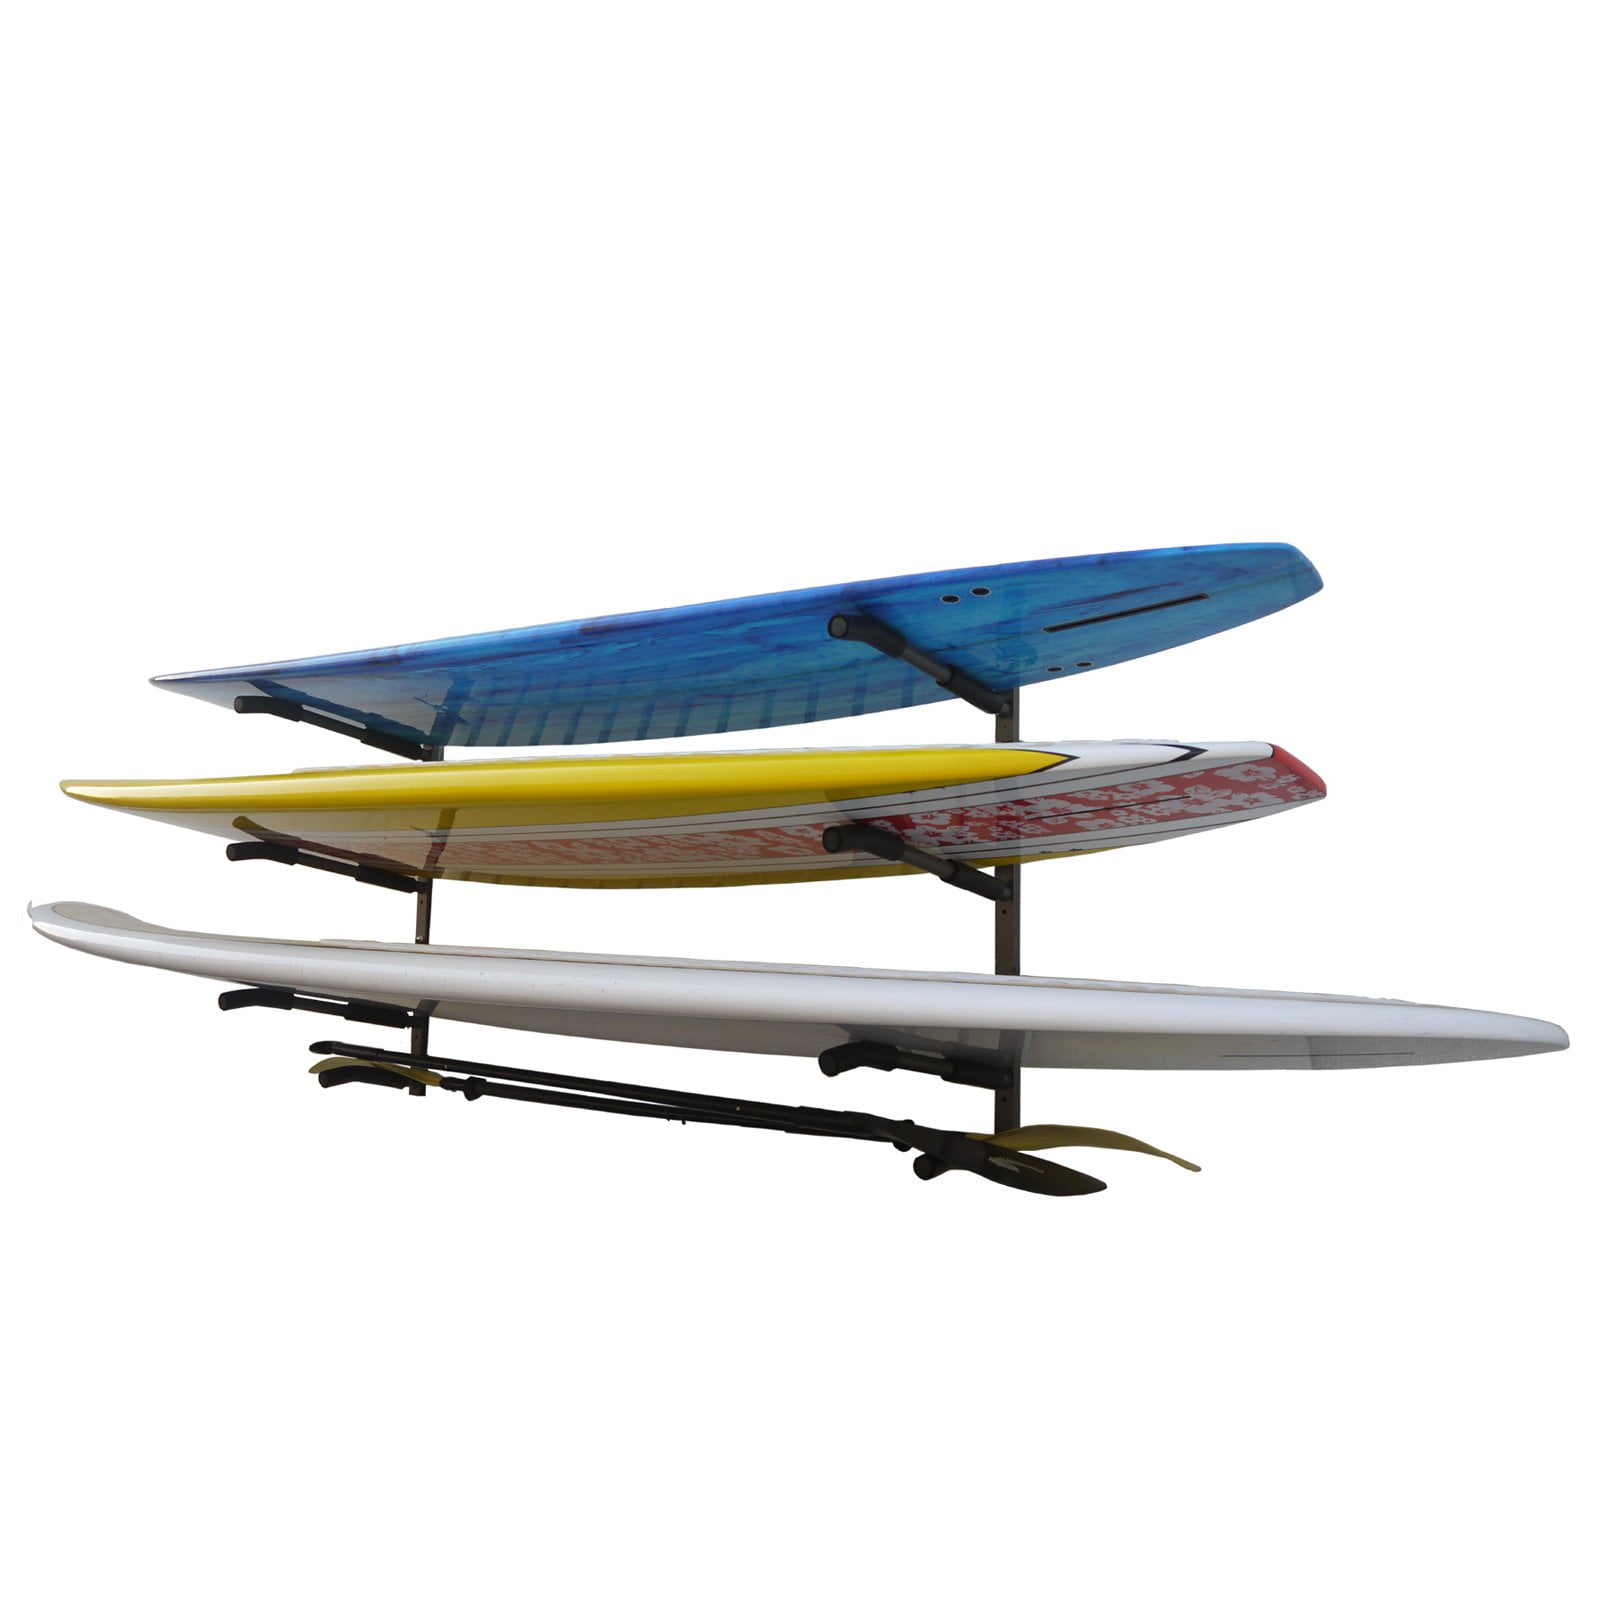 Glacik Wall Mount Rack Storage System for SUP/Paddle Boards  Surfboards,  Holds 3 Boards, Powder-Coated Rust Prevention - Walmart.com